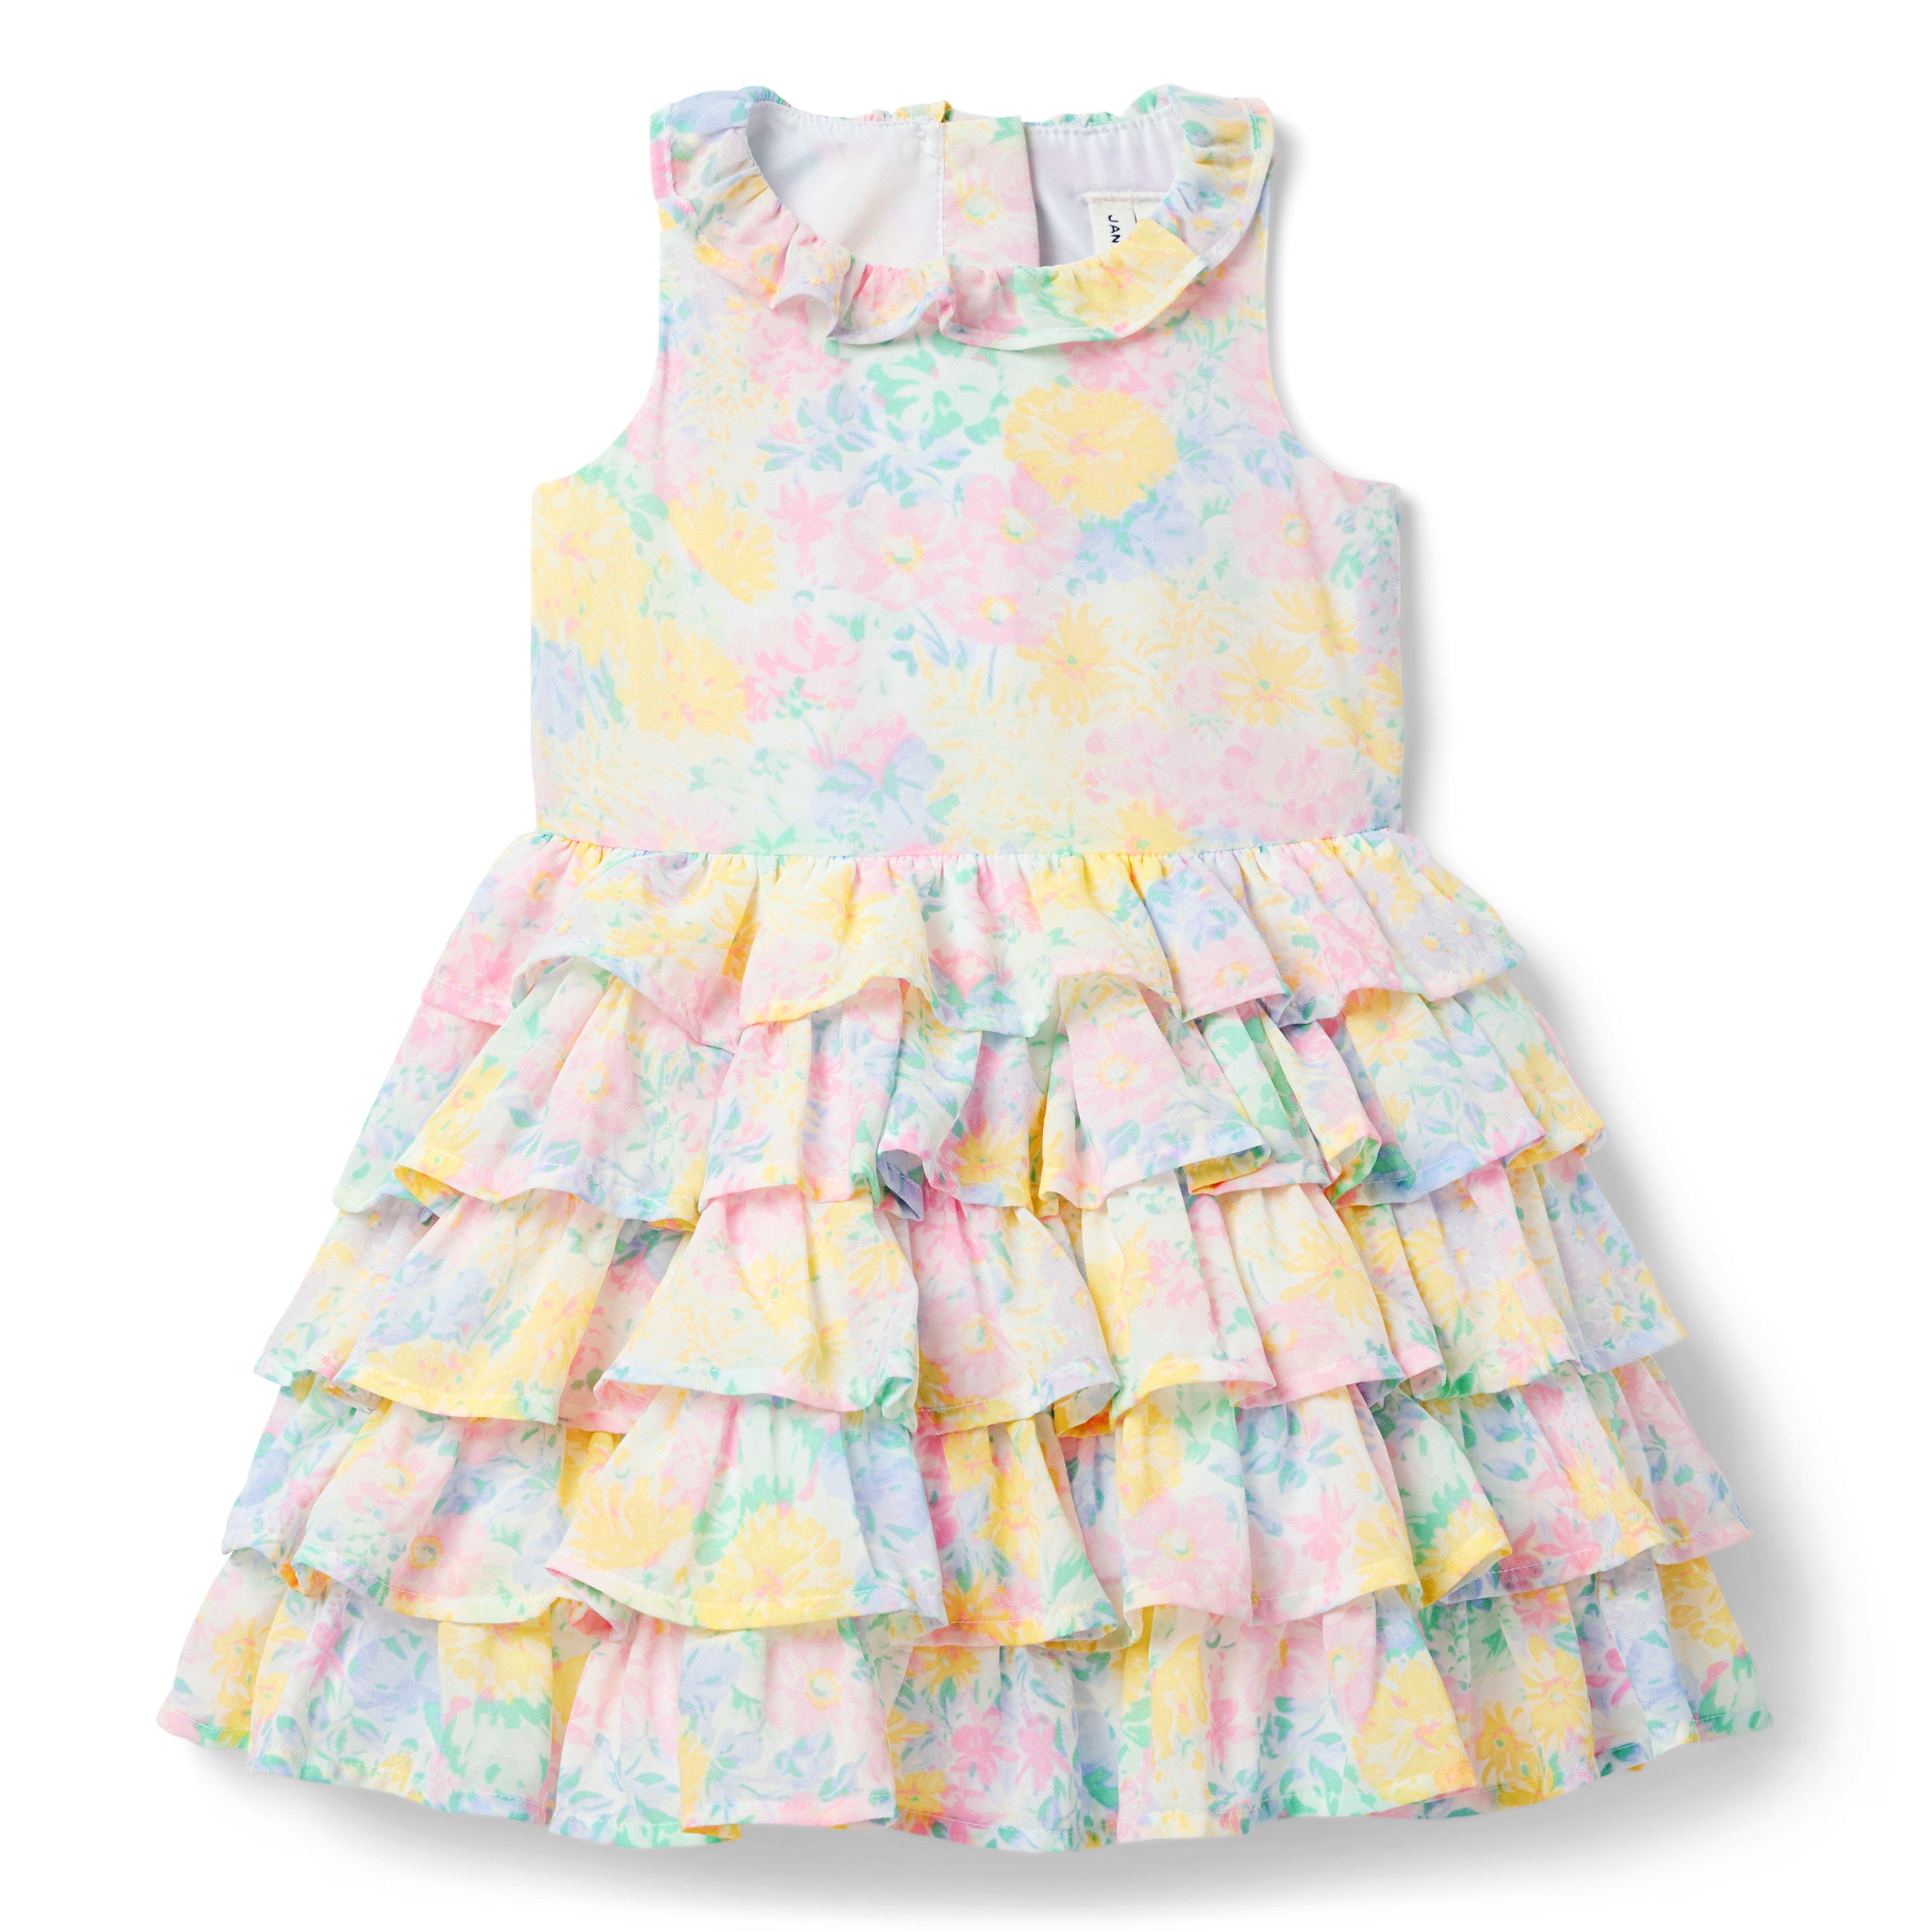 The Floral Frills Dress